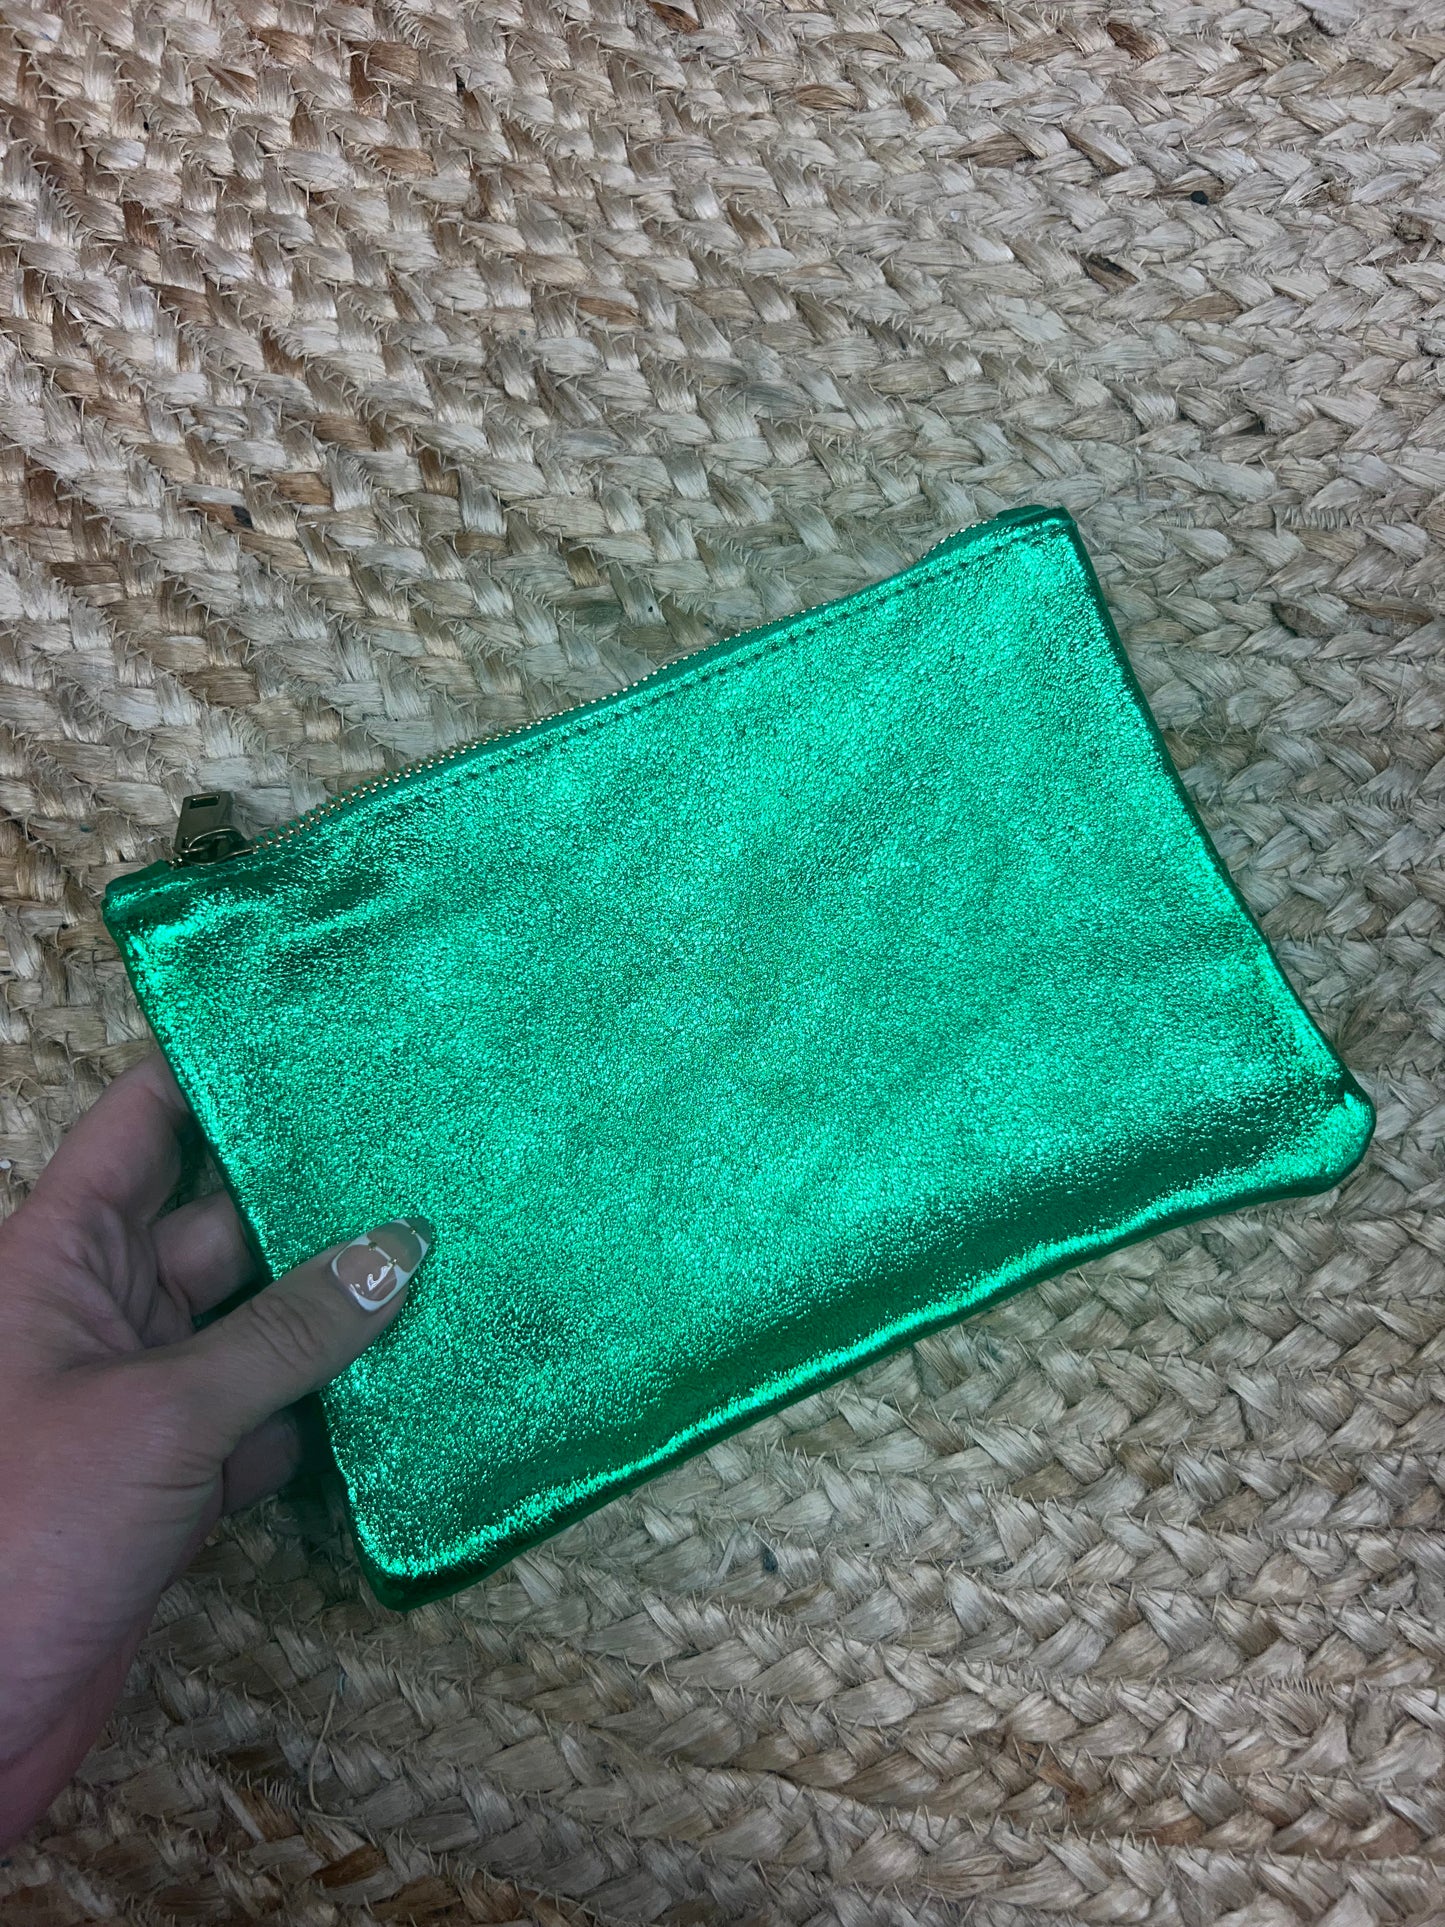 The Olivia Shimmer Pouch